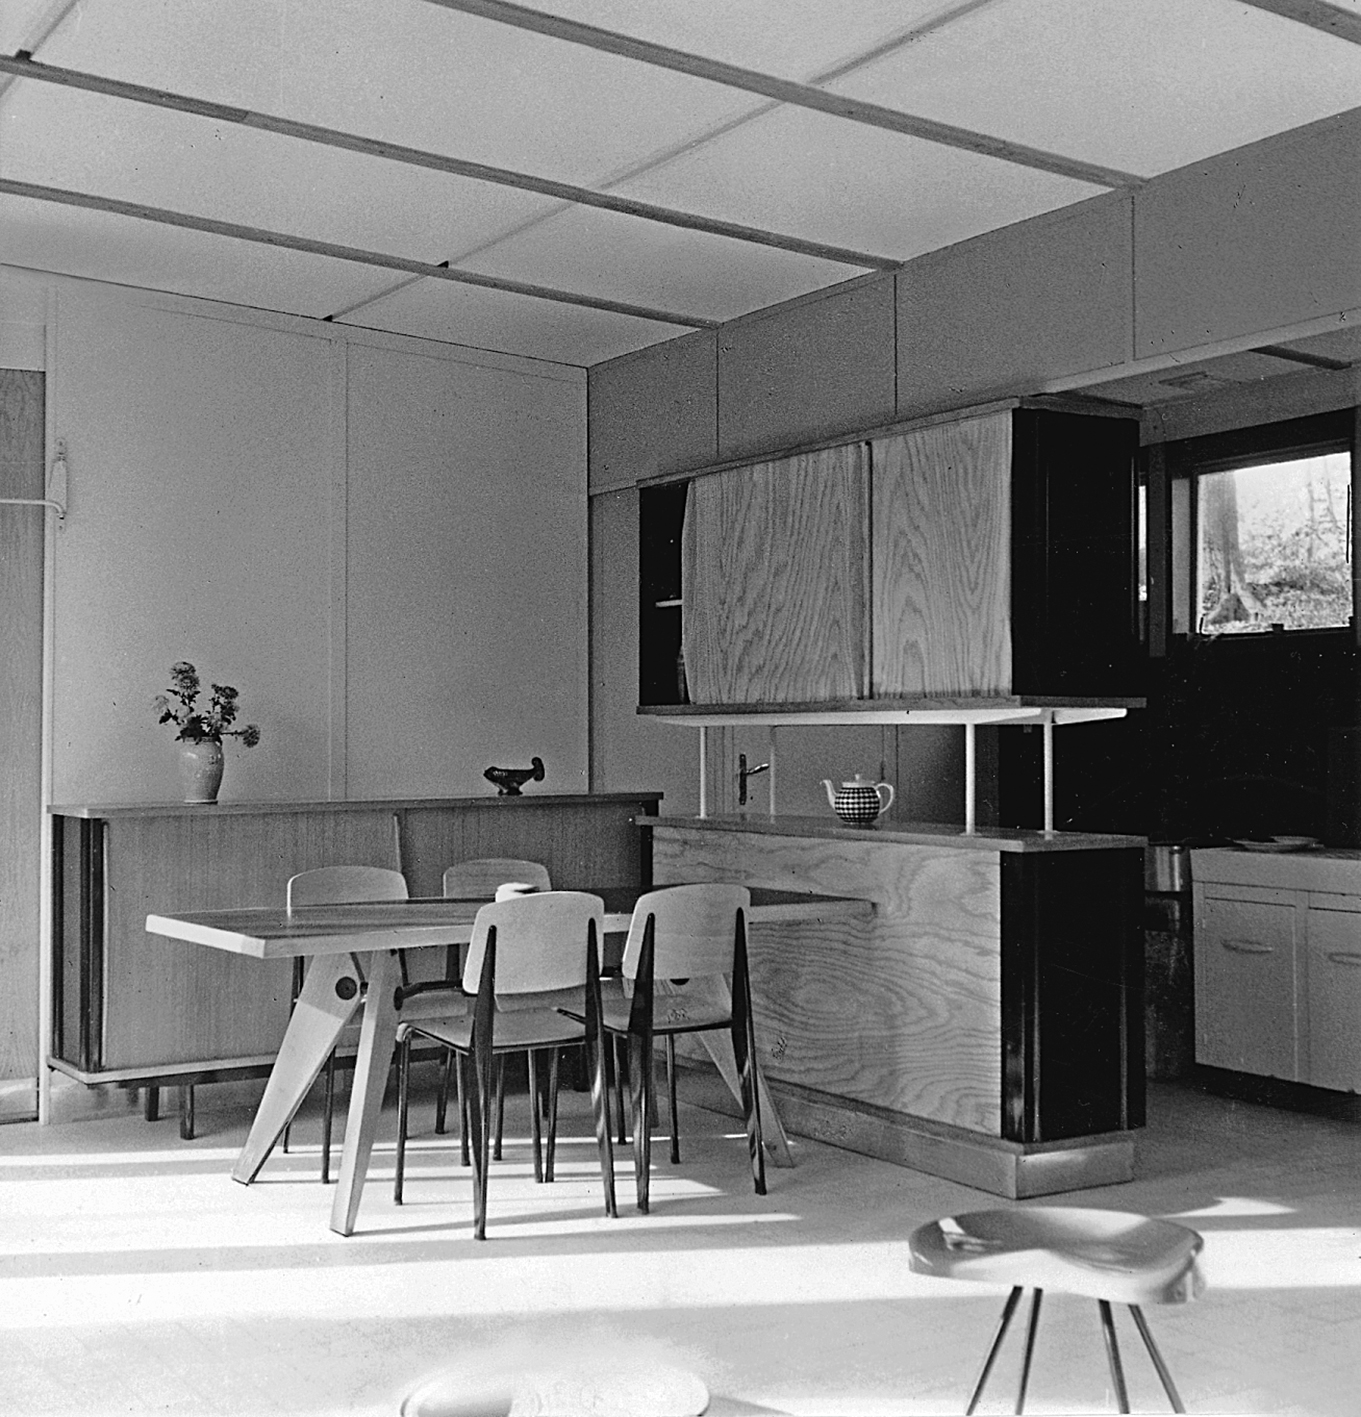 Coque house, Meudon (H. Prouvé and A. Sive, arch., 1951). Dining area with a special cabinet (two superimposed cabinets no. 150 forming an interior window).